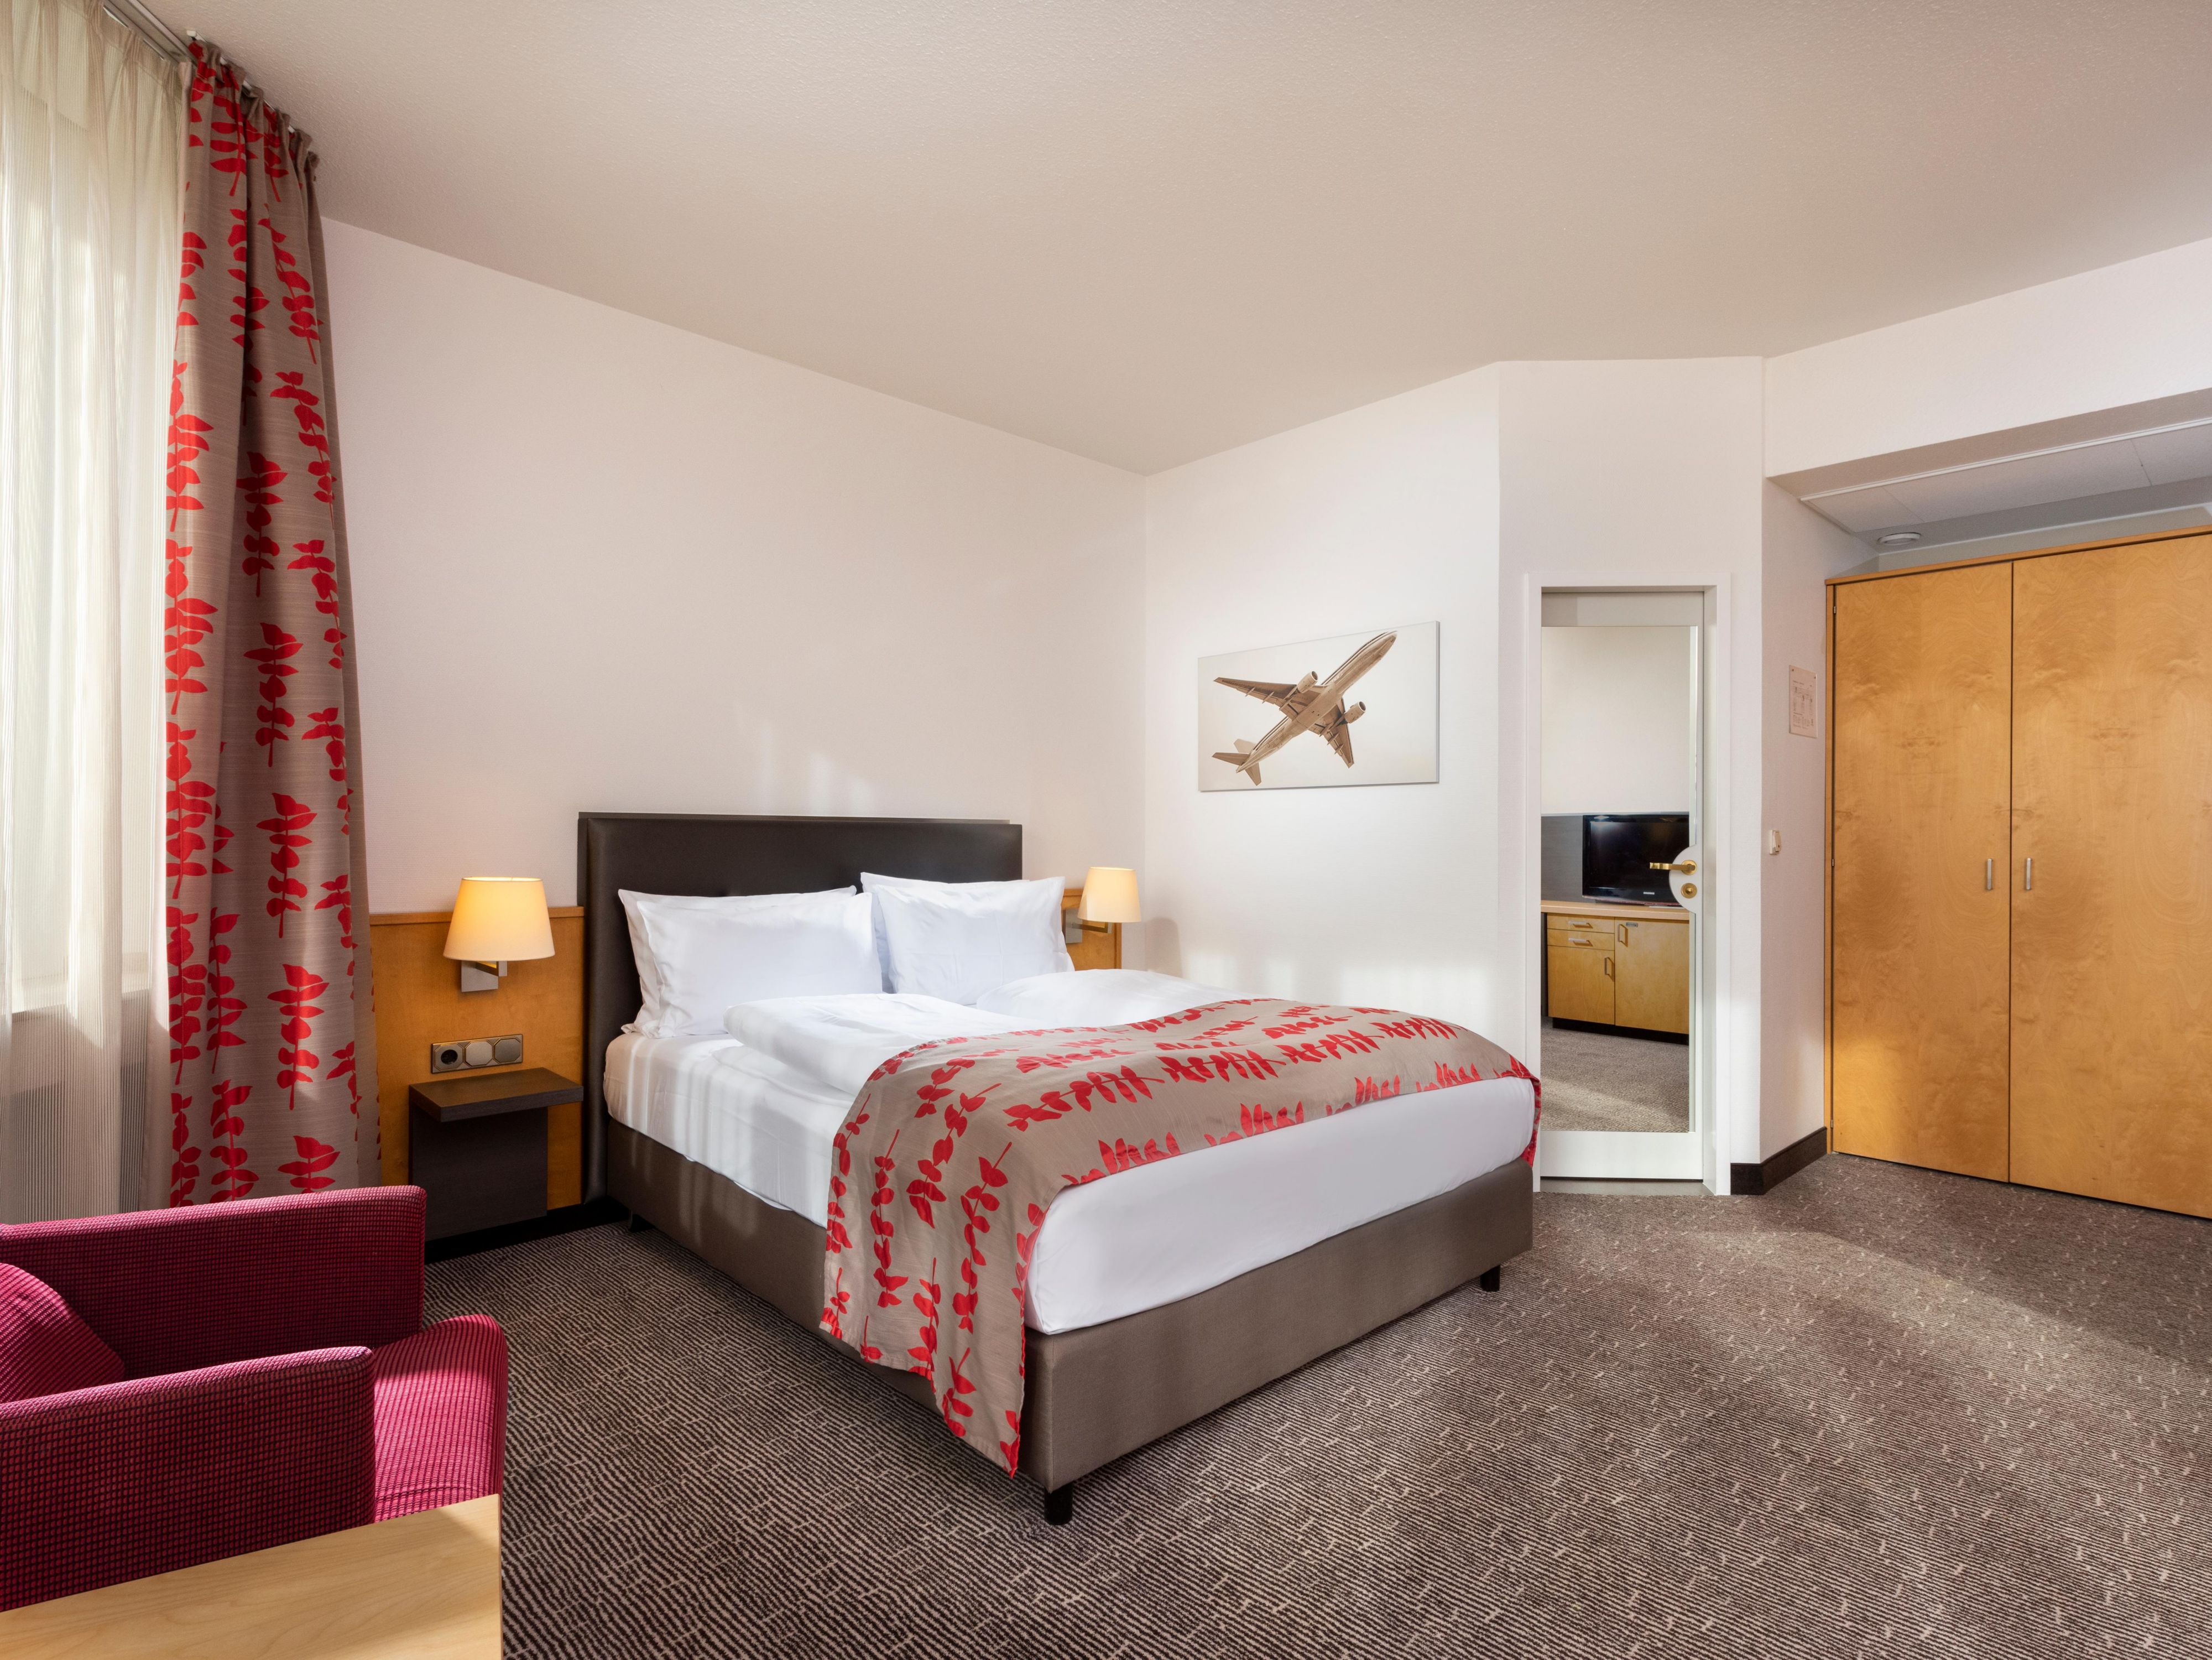 You can use our rooms to rest between meetings or as a day office. Of course, a Wi-Fi connection is included. Please contact our hotel directly for further information.